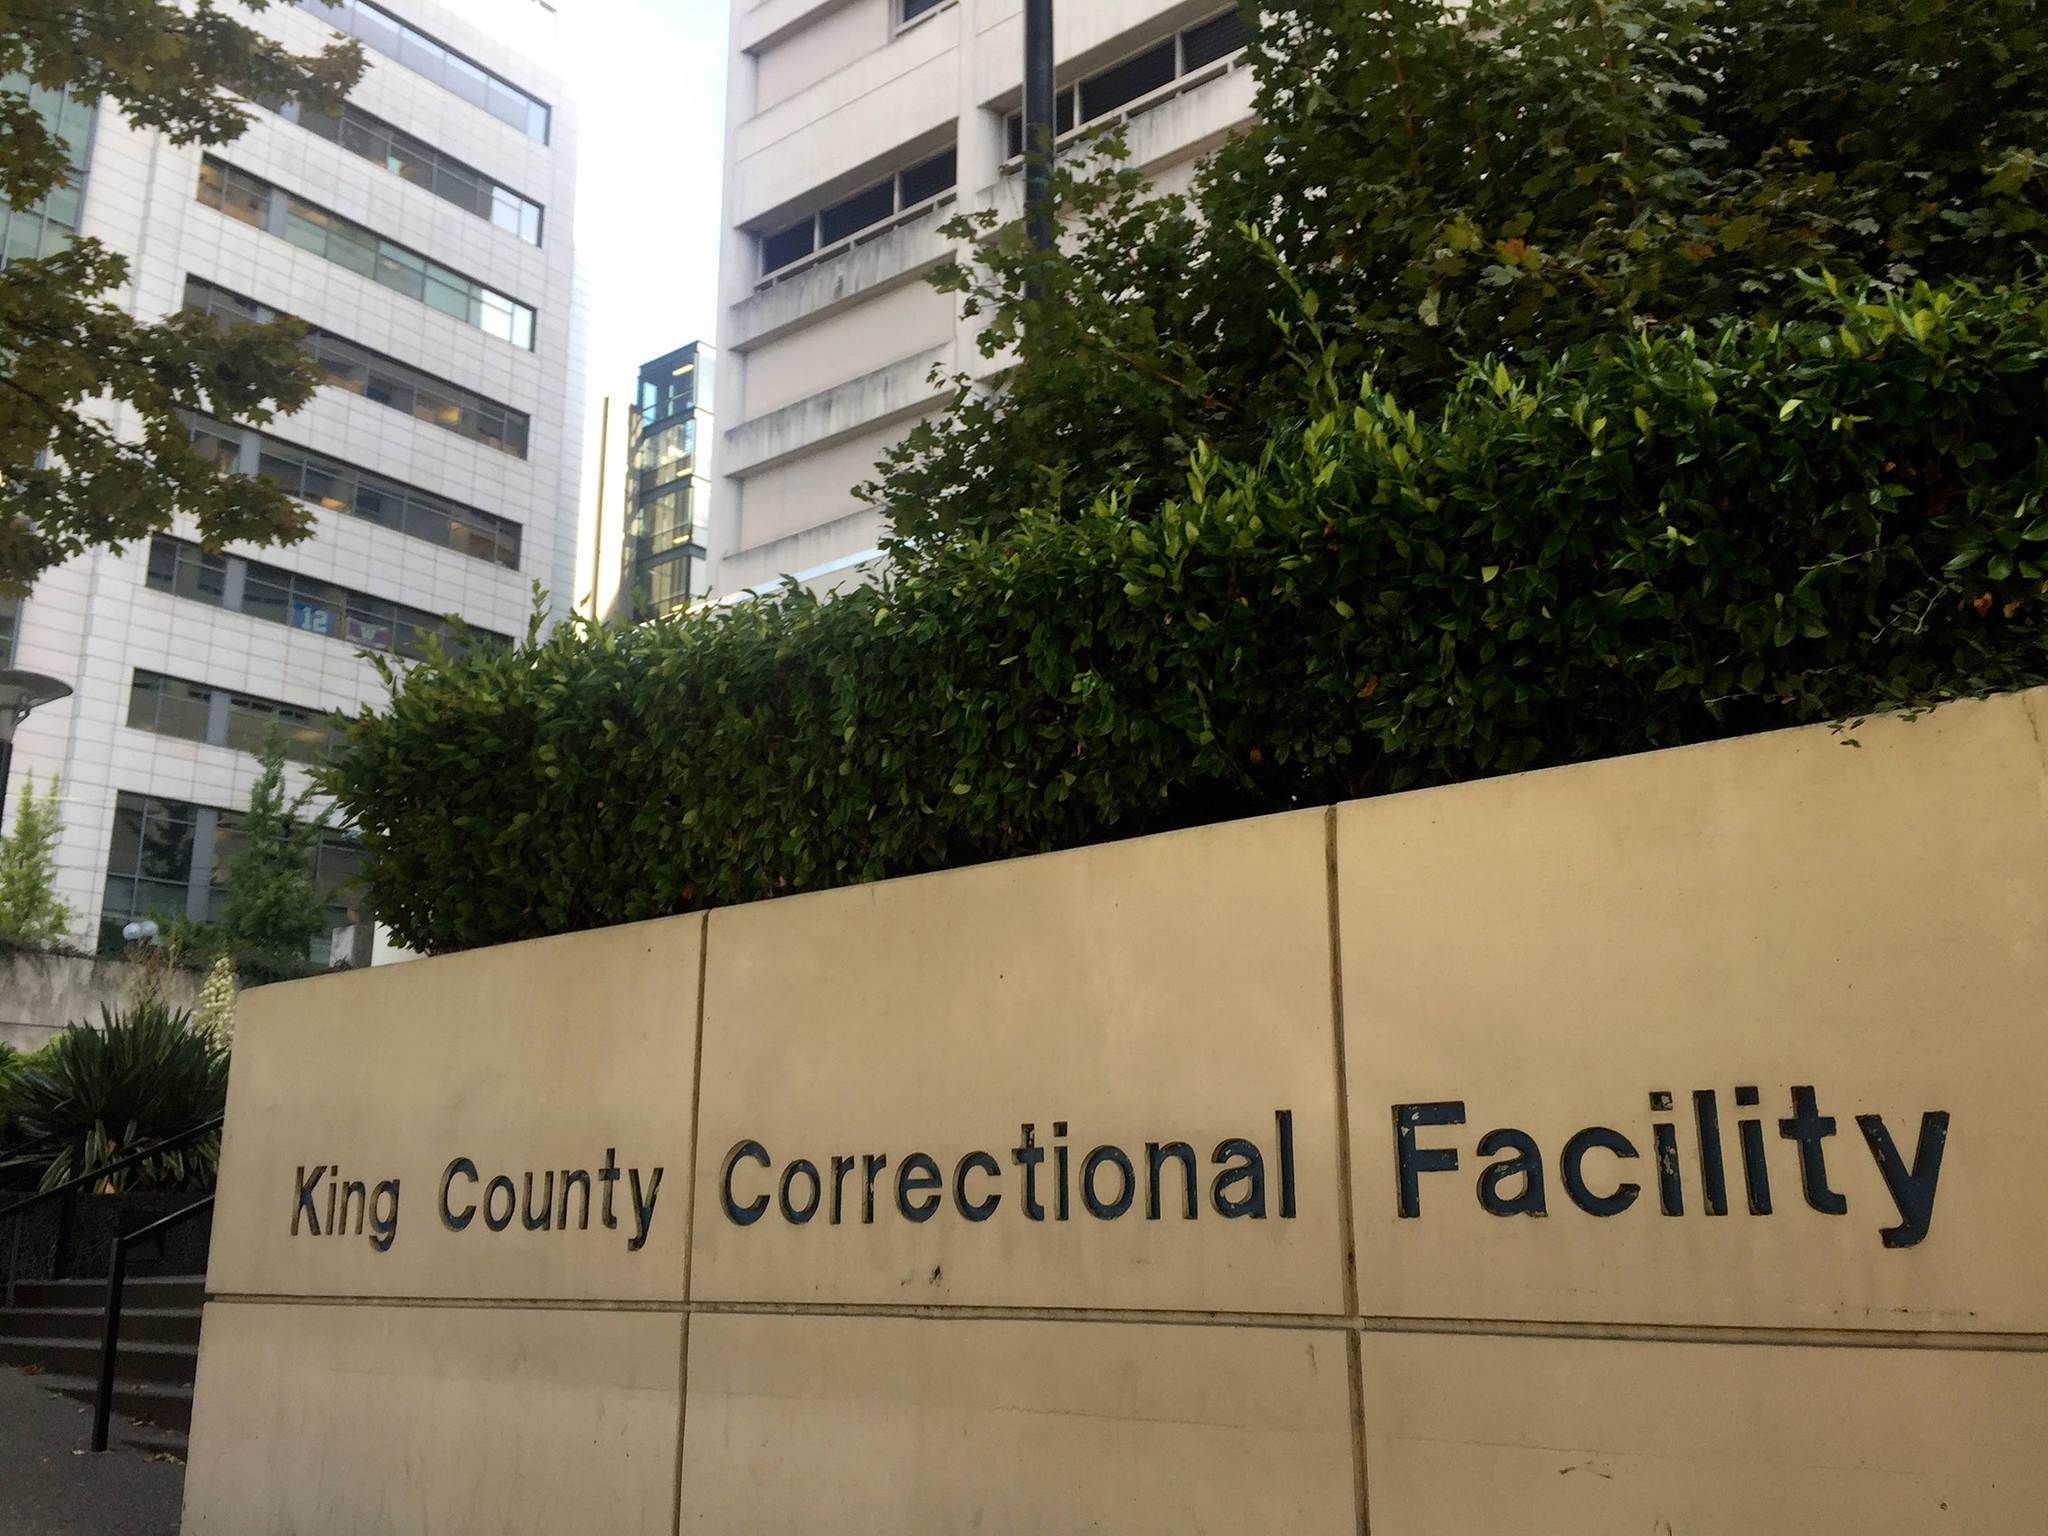 King County Correctional Facility is located at 500 5th Ave., Seattle. Photo by Josh Kelety